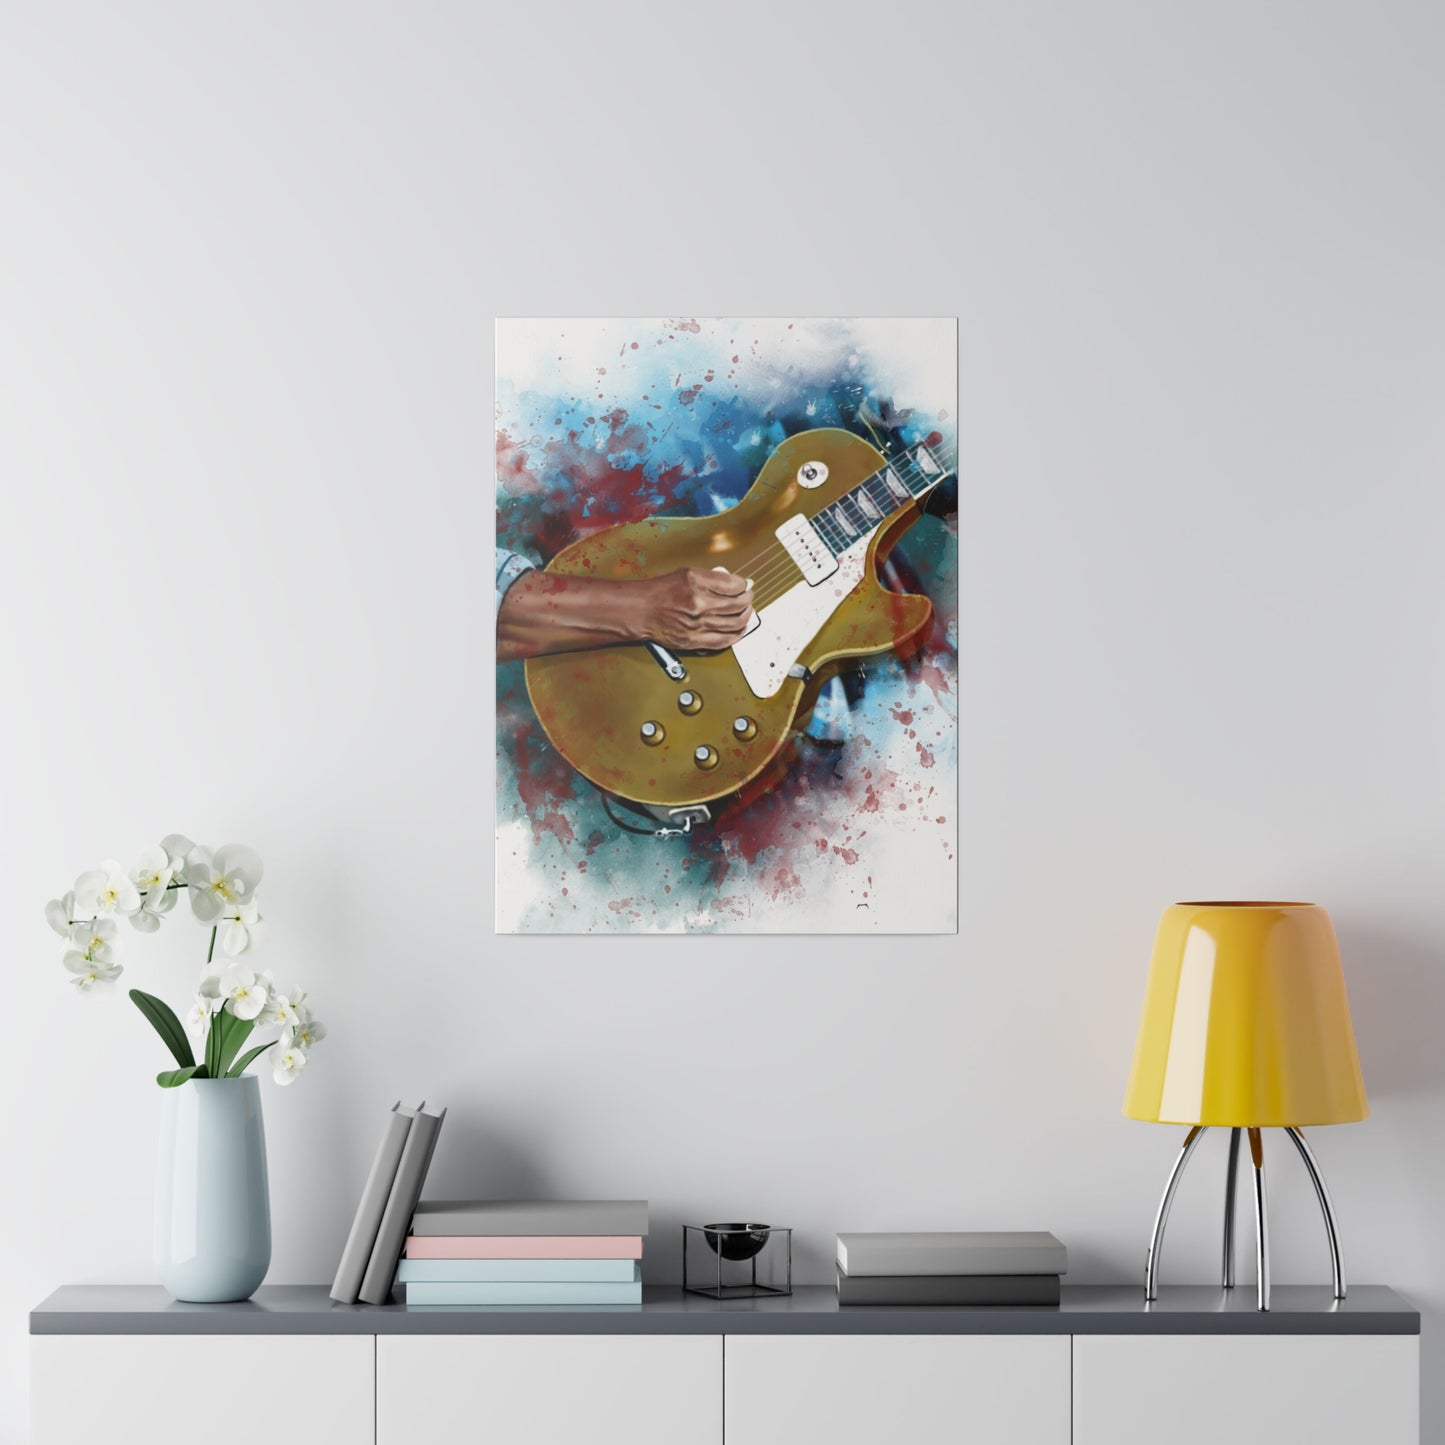 Digital painting of a goldtop electric guitar printed on canvas